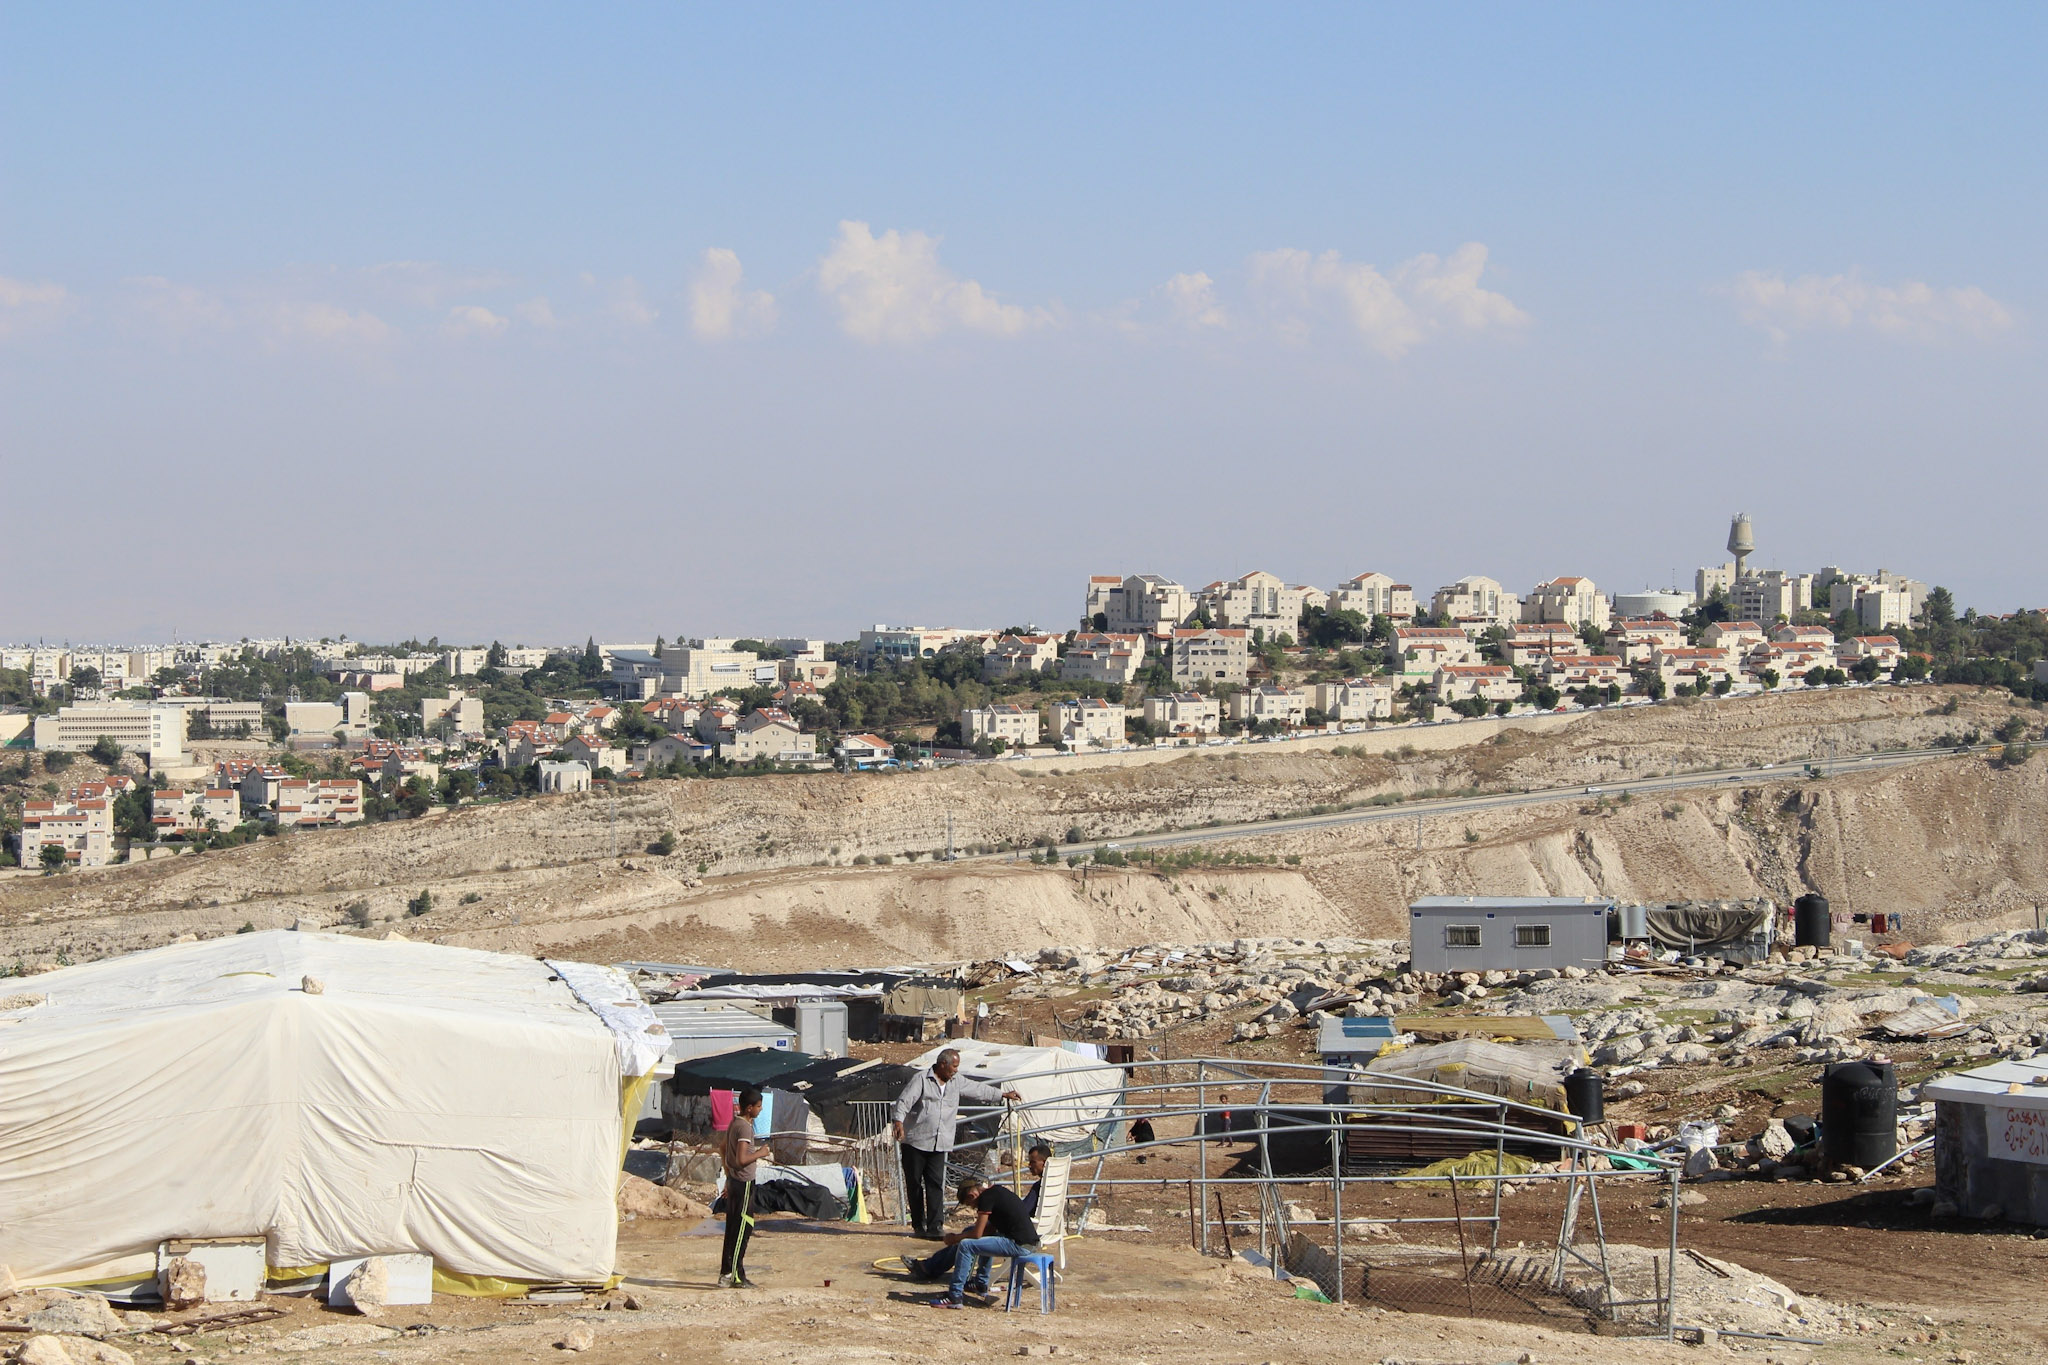 The Israeli settlement of Maale Adumim in the background, the Palestinian village of Jabal al Baba in the foreground